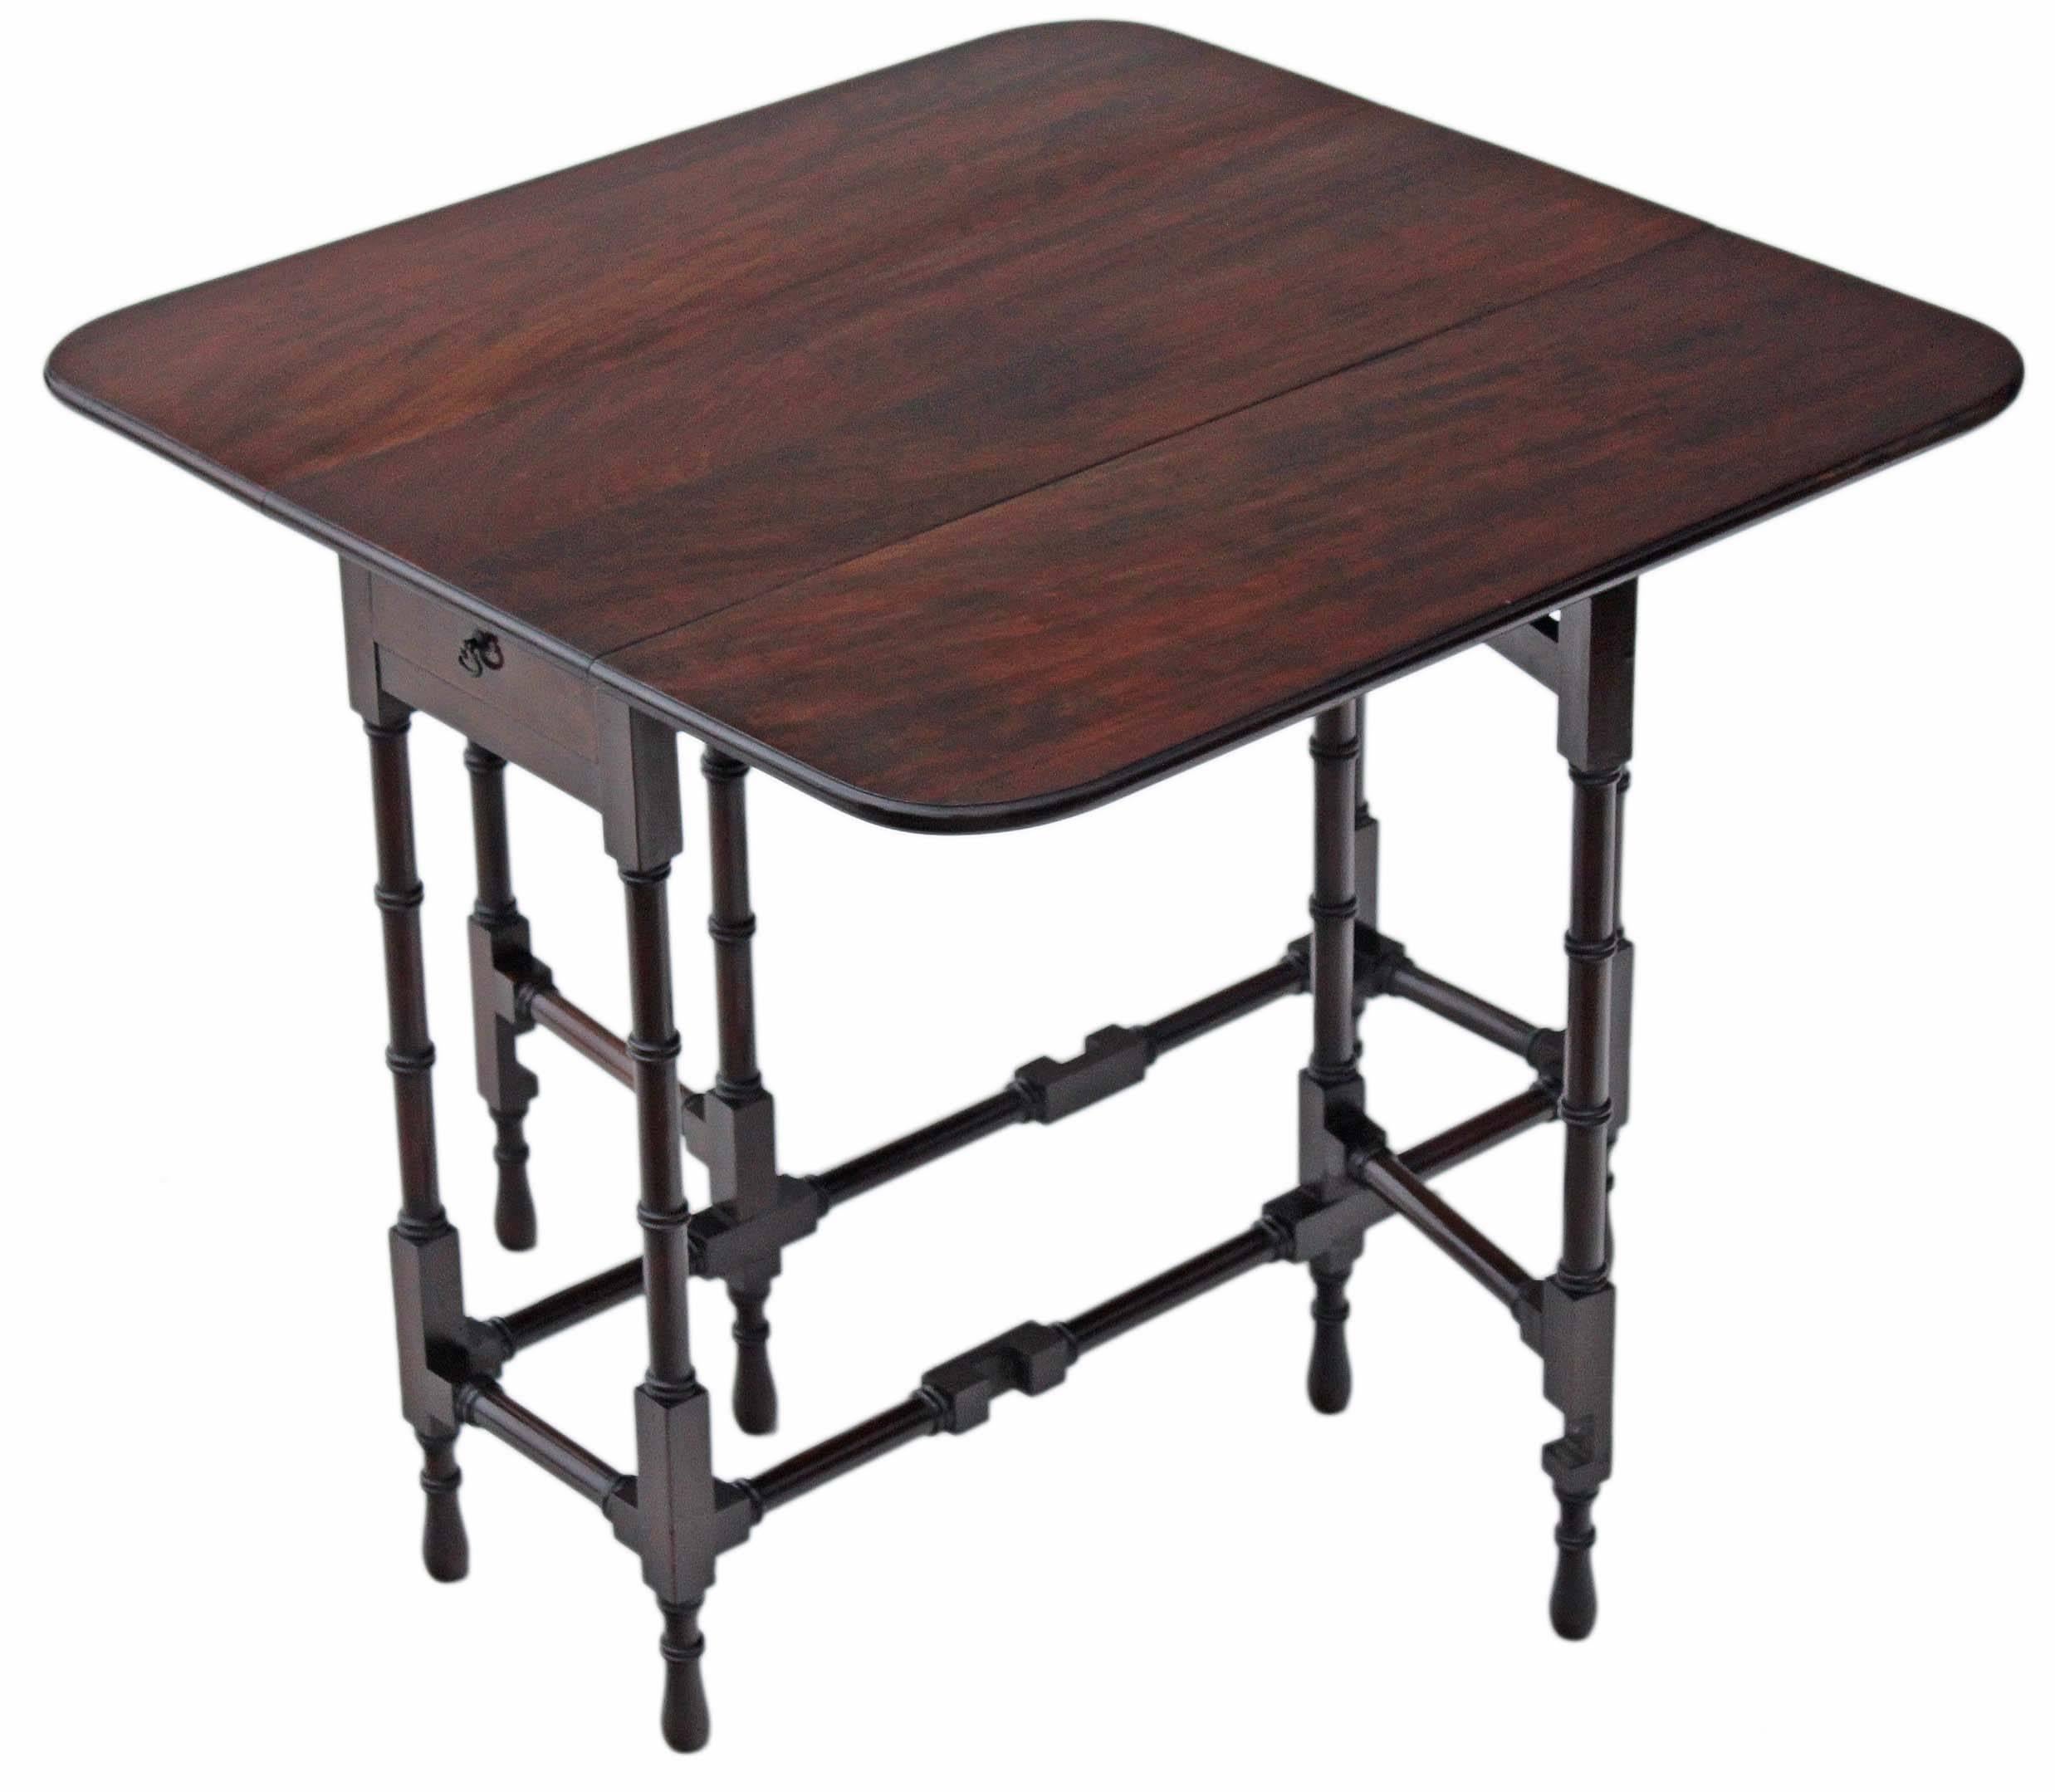 Antique quality mahogany spider Sutherland side occasional tea table.

This is a lovely table, that is full of age, charm and character, dating from the early 20C.

A very unusual rare design, with a lovely dark mahogany colour.

The table has